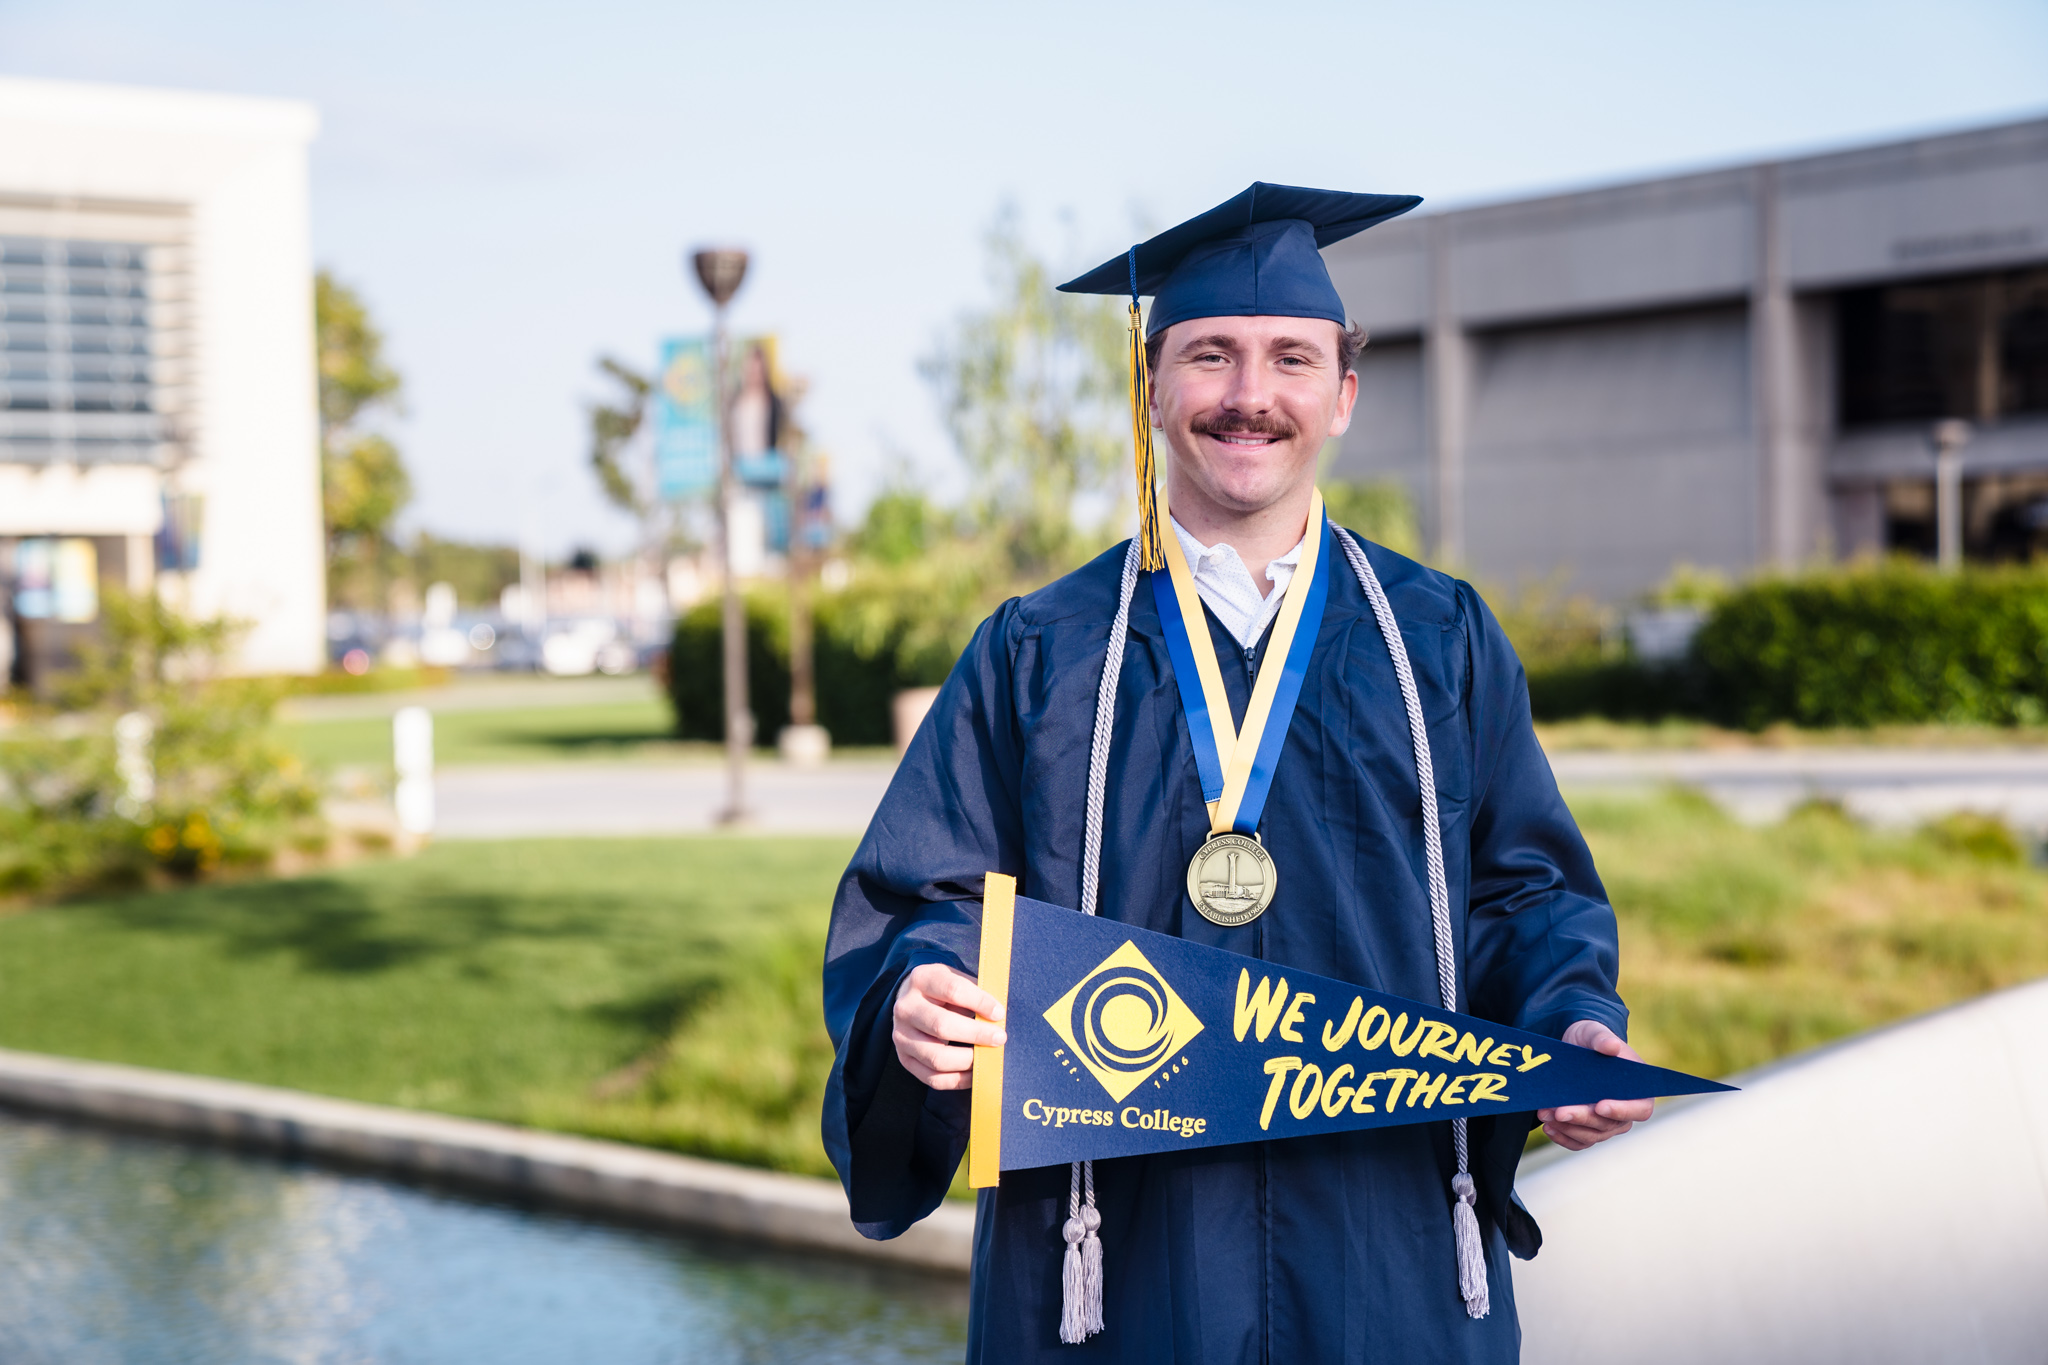 Student Garrett Deiro stands in front of a Cypress College building while wearing graduation regalia.